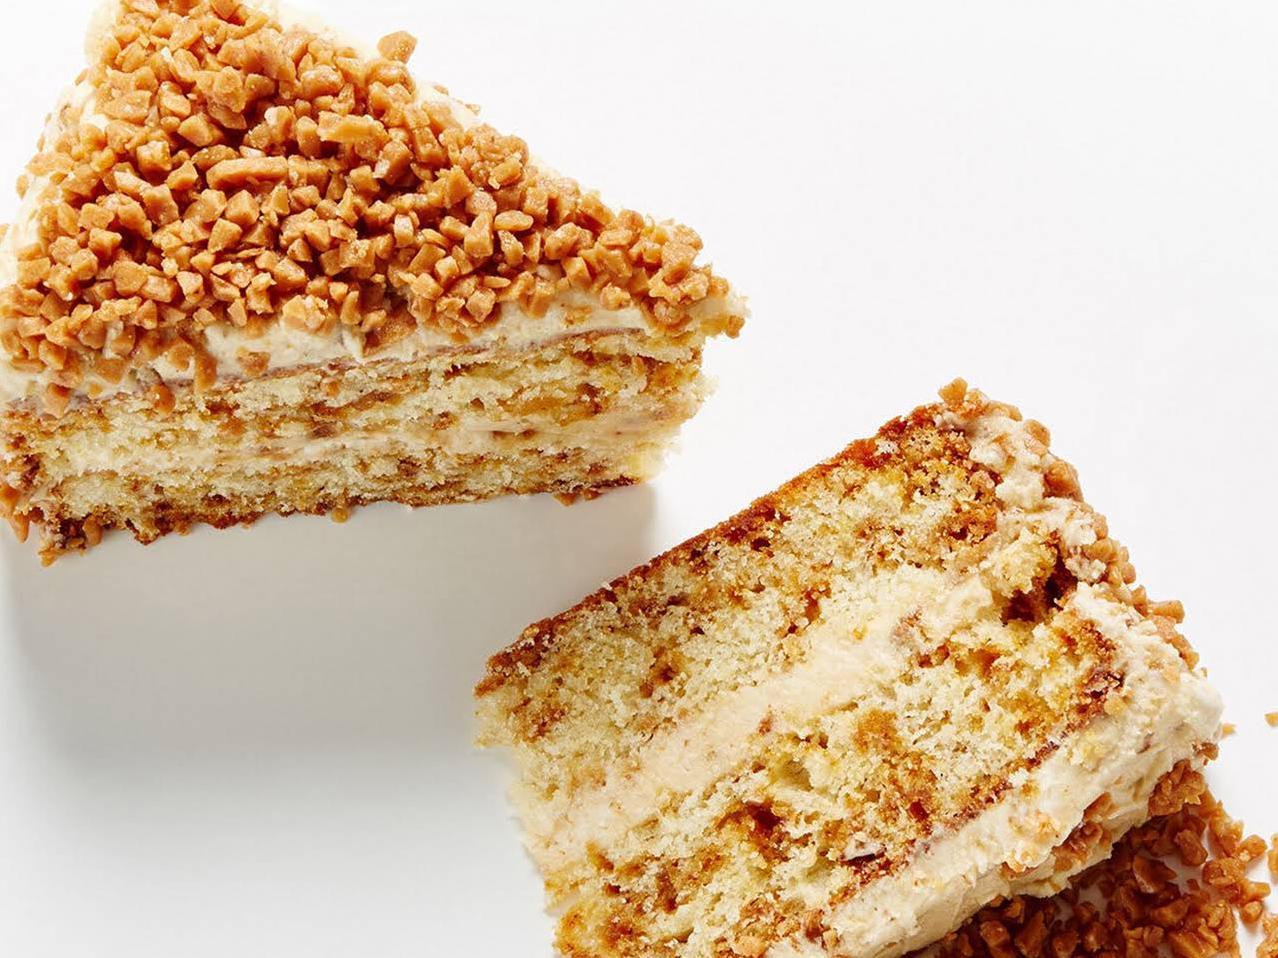  No need for a special occasion, treat yourself to this spice cake any day of the week